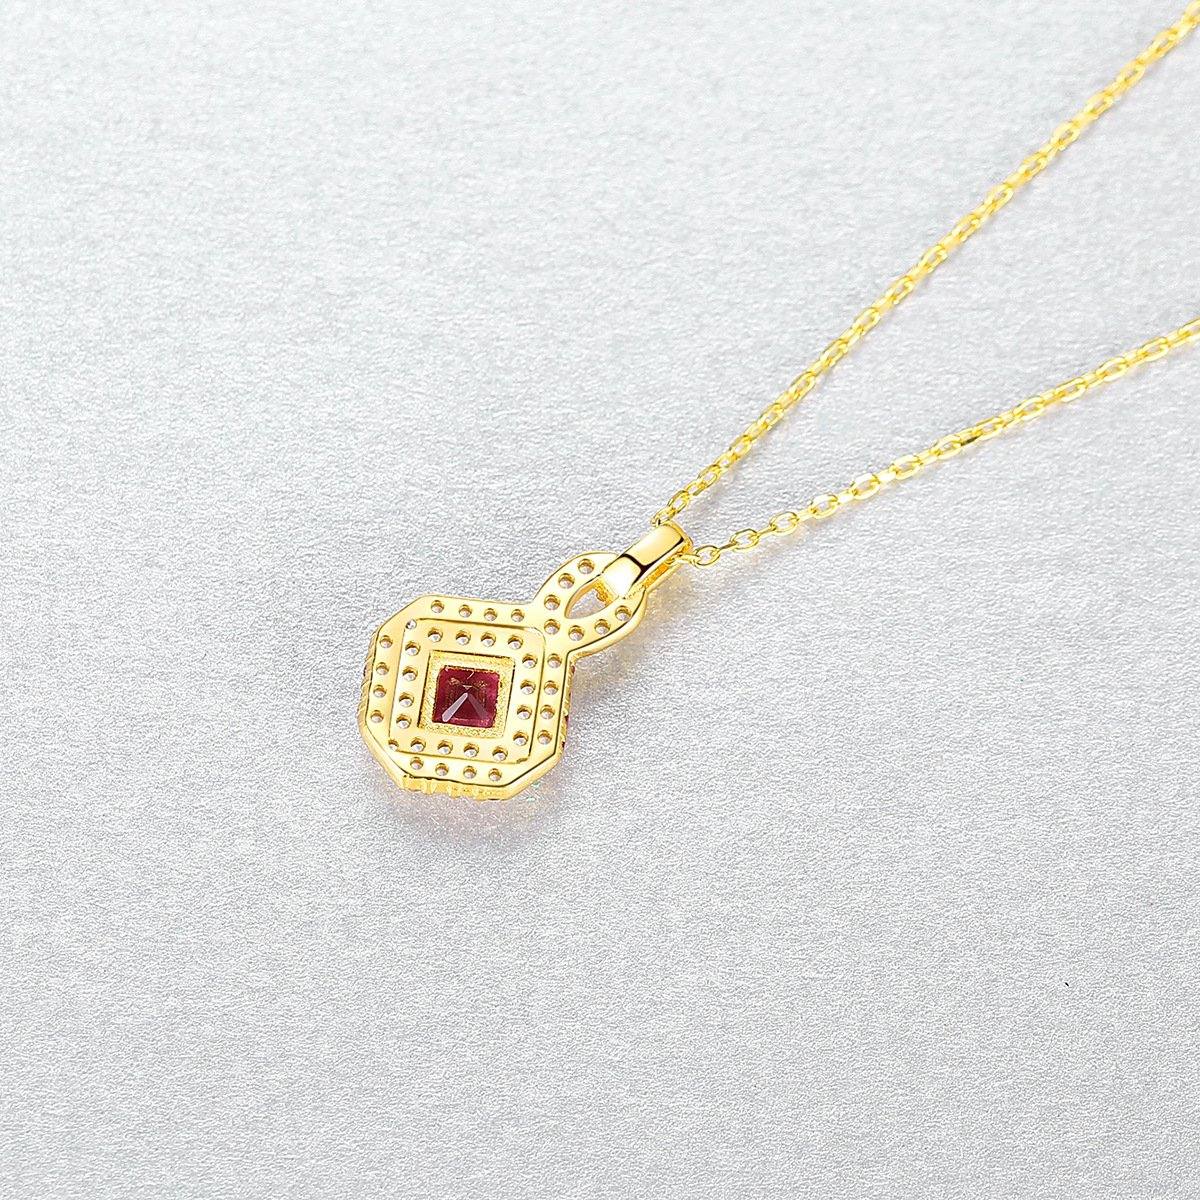 Vintage Gold Ruby Necklace - HER'S